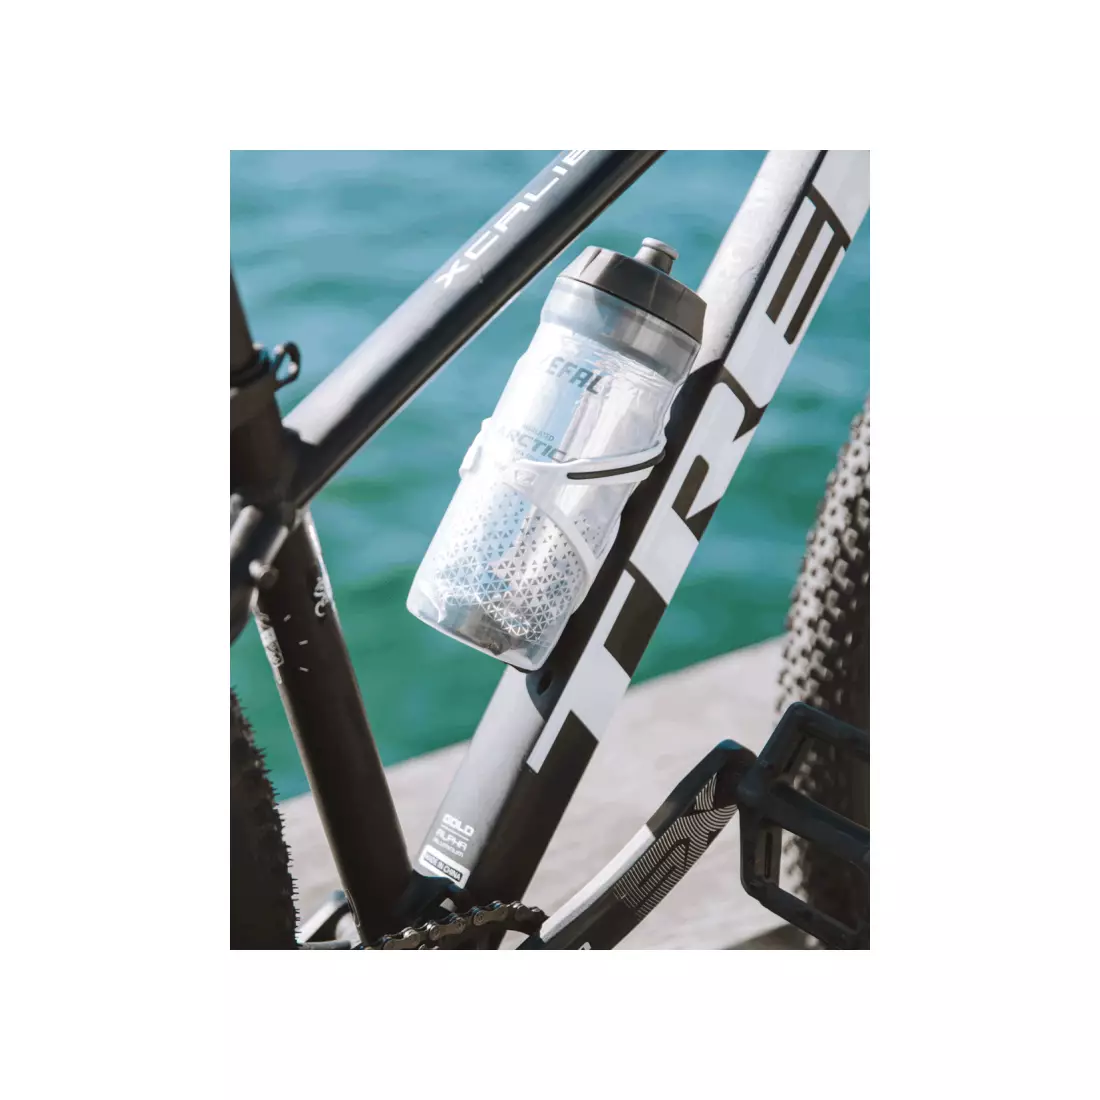 ZEFAL bicycle thermal water bottle ARCTICA 55 silver/black 0,55L ZF-1660